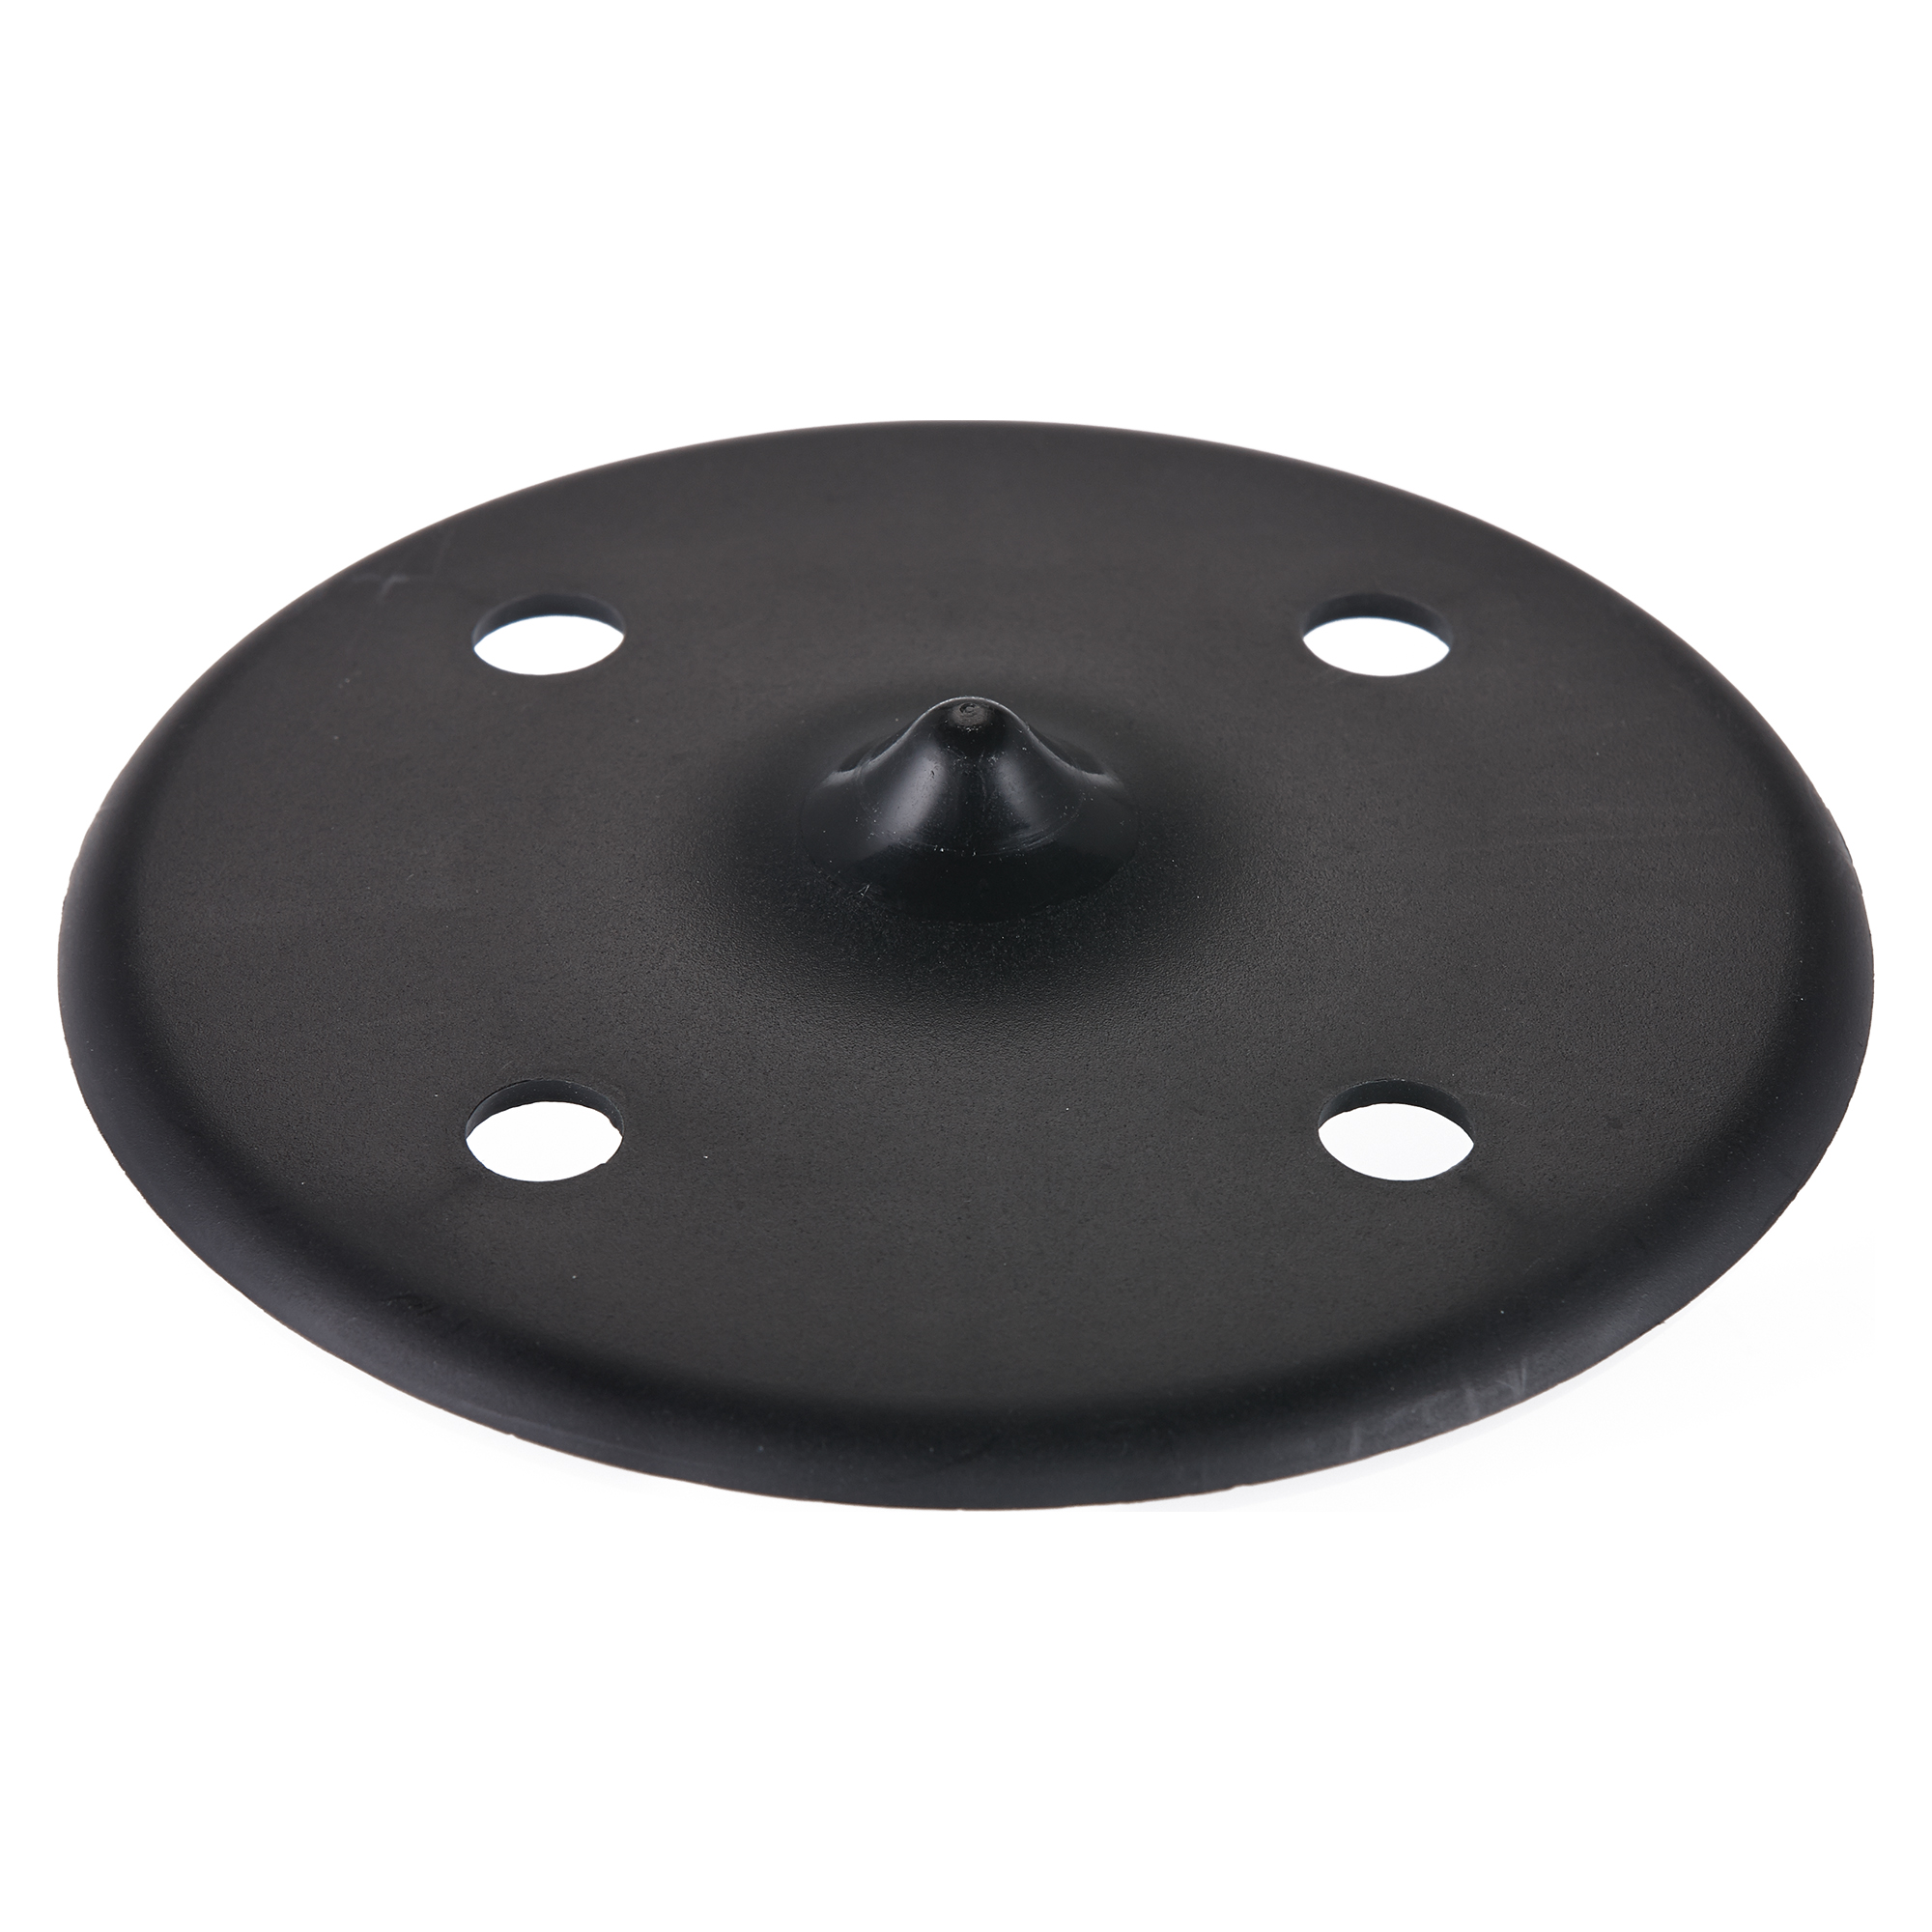 Plastic plate for Salad Spinner (Item no. 15695)